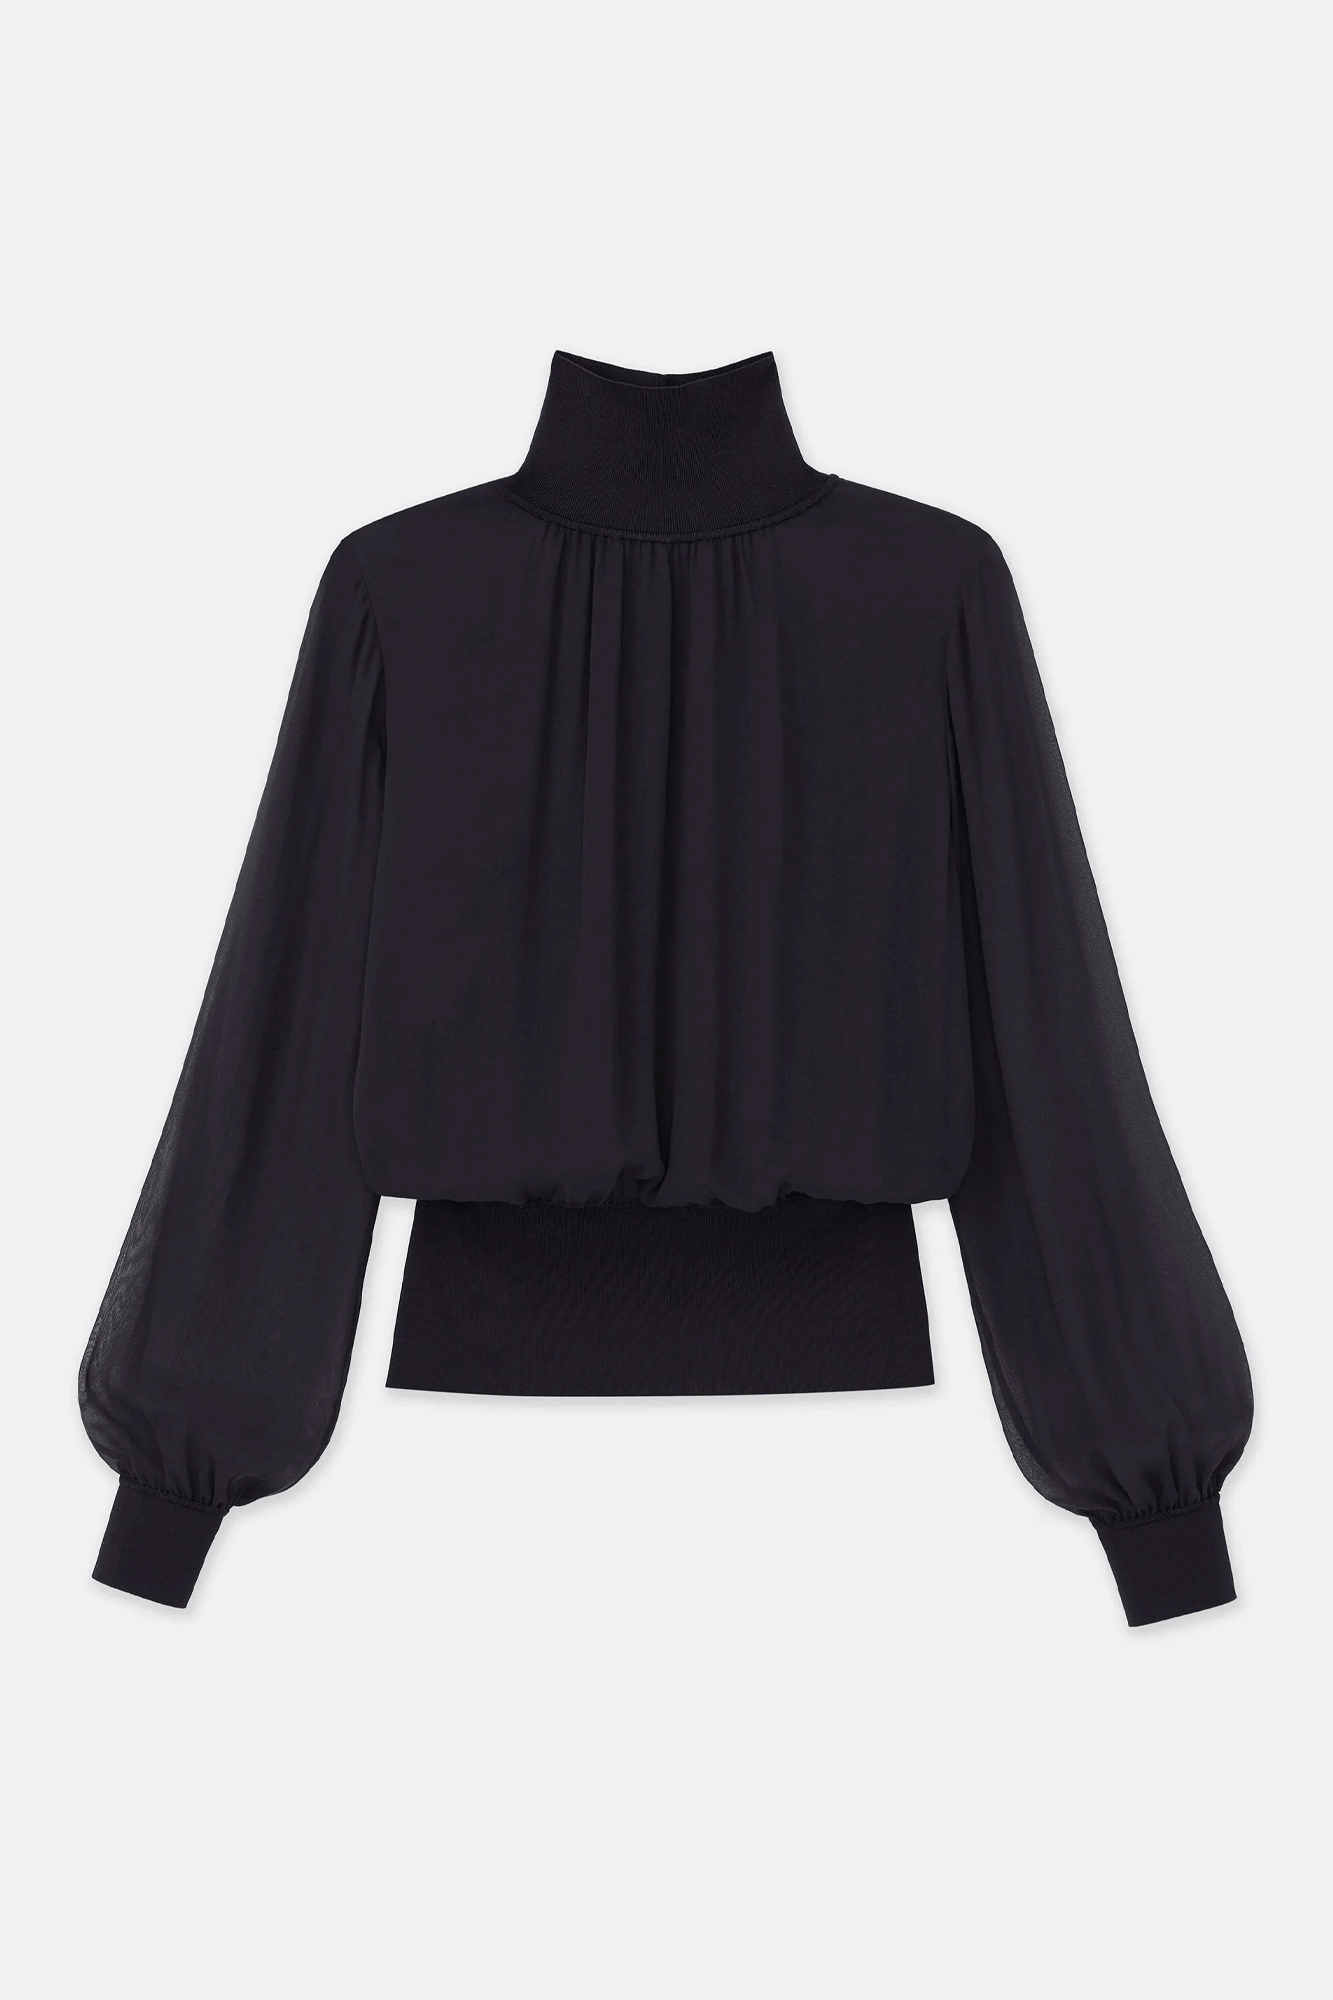 This Turtleneck Blouse with Knit Trim from Lafayette 148 is crafted with luxurious silk georgette and finished with ribbed trim for an elevated look. The blouson top features gathered pleating and sheer long sleeves, and is lined with silk chiffon for added comfort. Perfect for any chic, modern wardrobe.